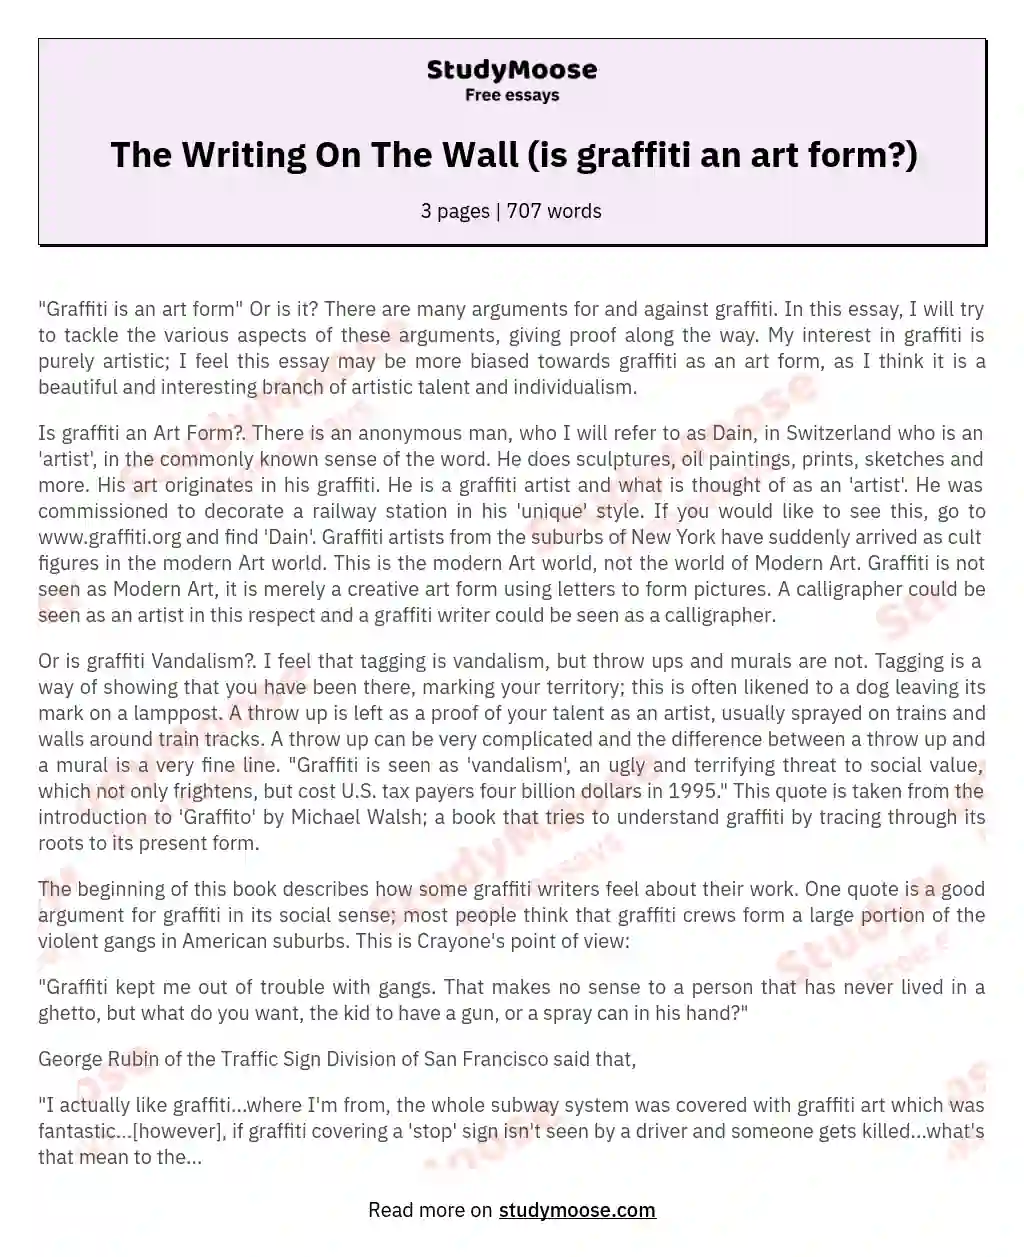 The Writing On The Wall (is graffiti an art form?) essay